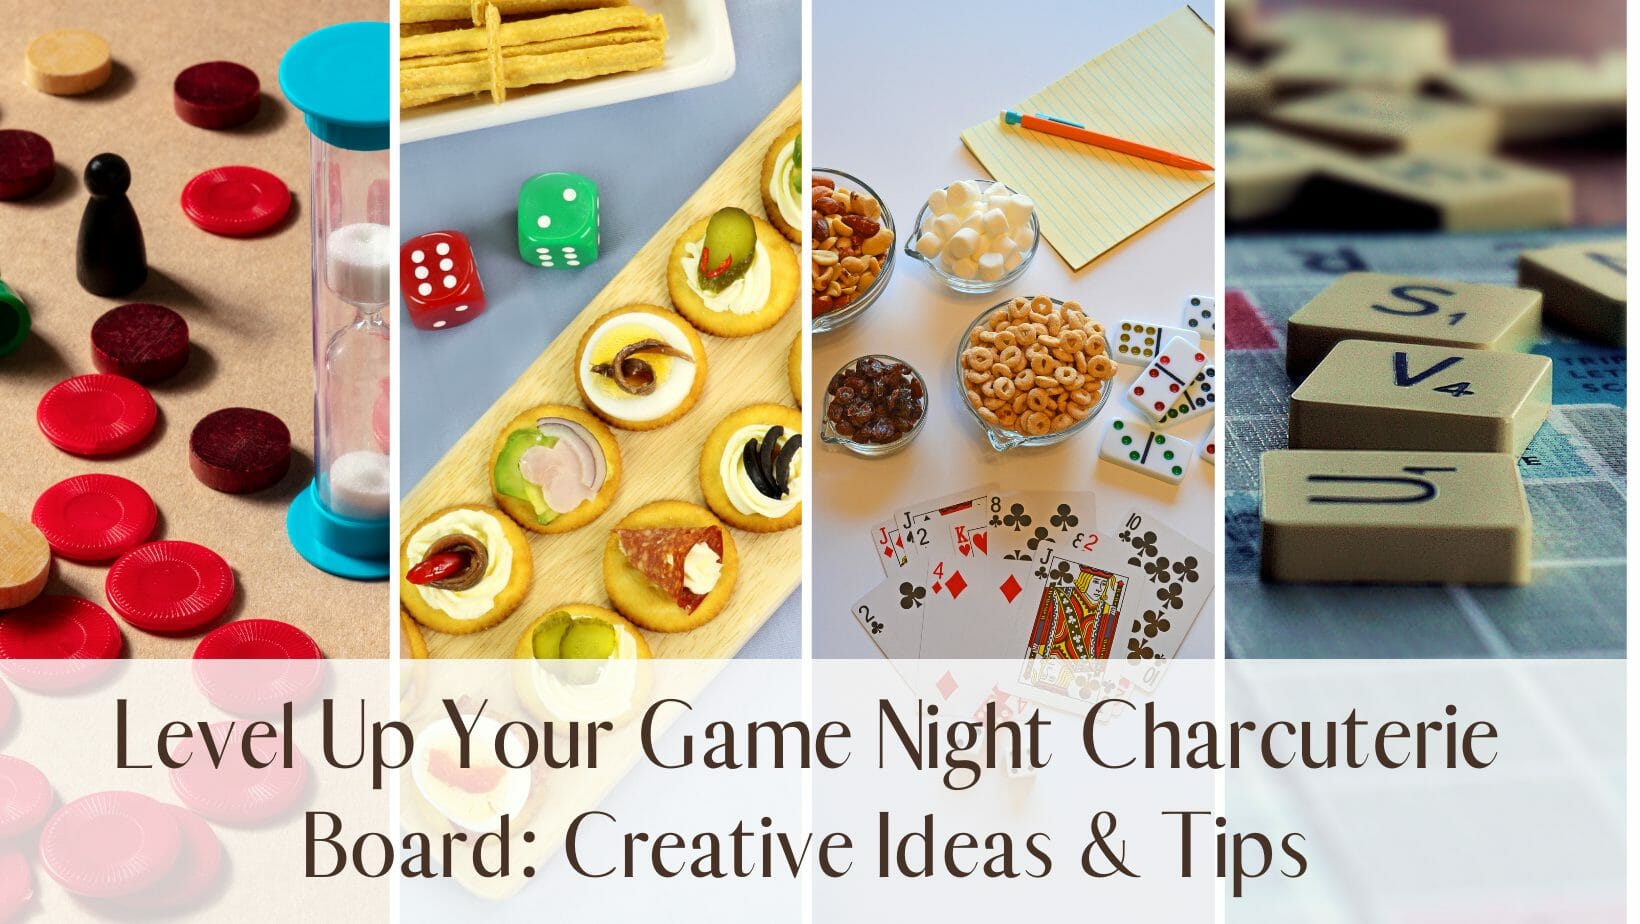 Level Up Your Game Night Charcuterie Board: Creative Ideas & Tips 